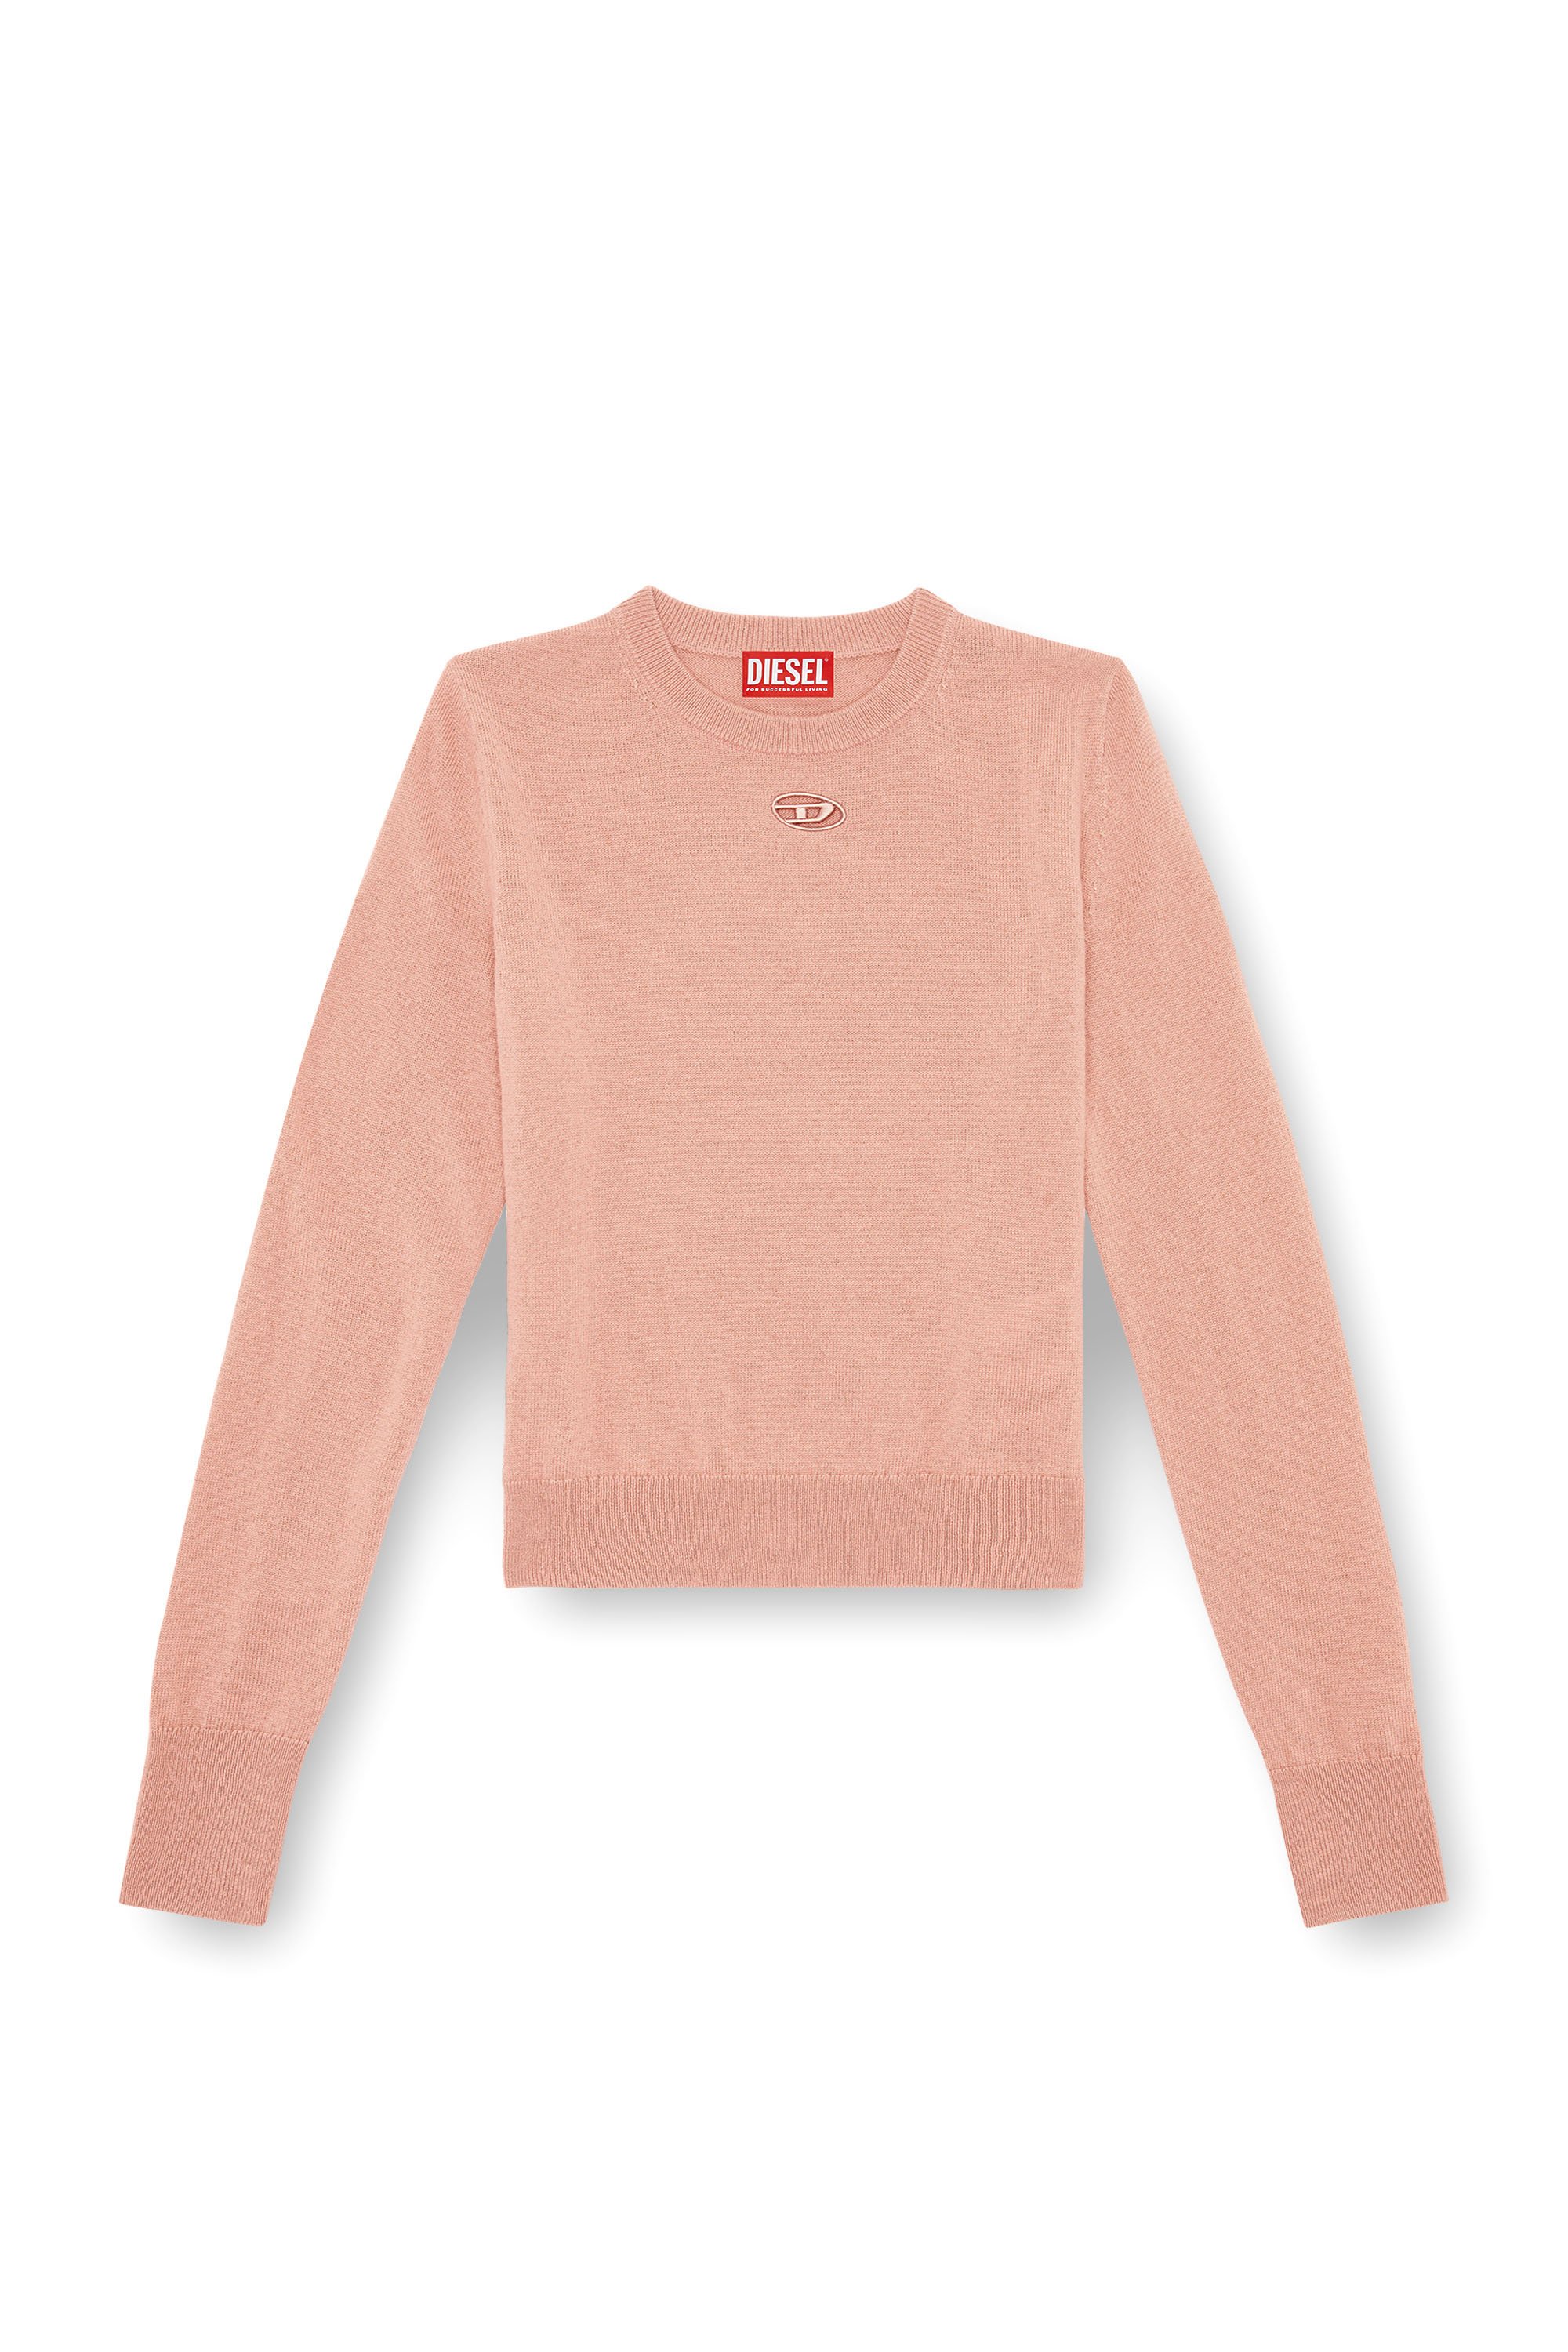 Diesel - M-AREESAX, Donna Top in lana e cashmere in Rosa - Image 3